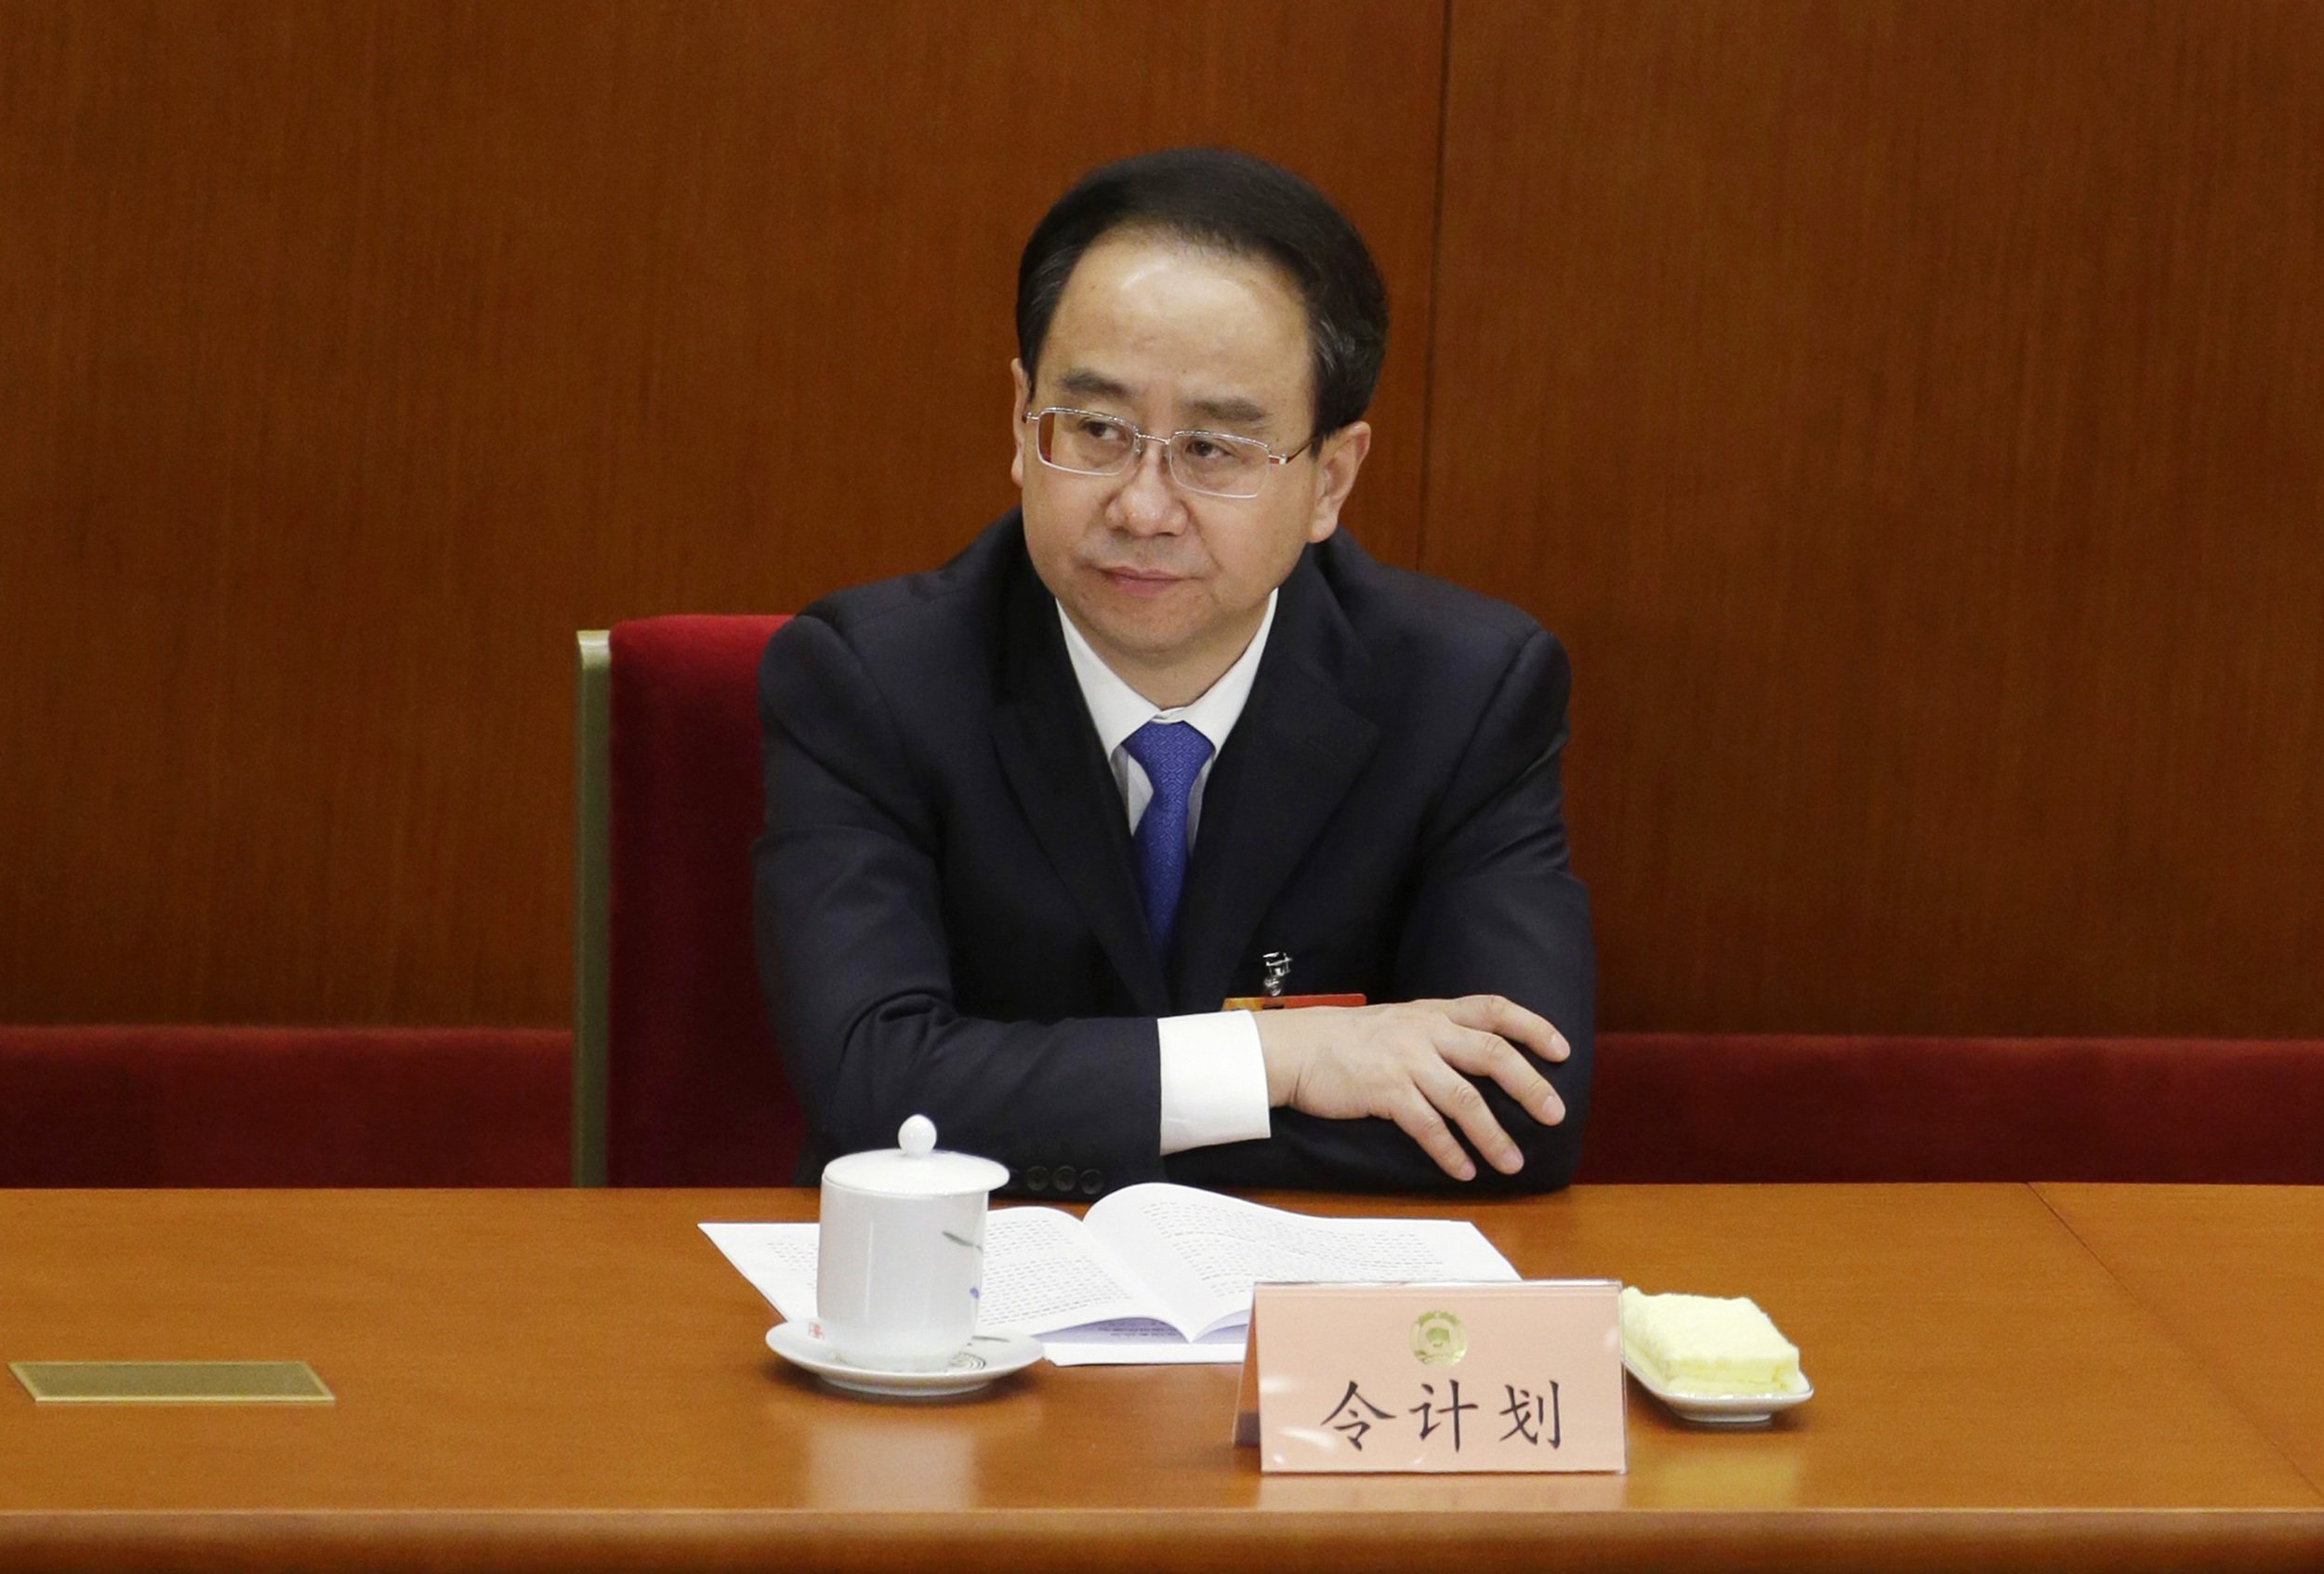 Ling Jihua and his siblings are under investigation for graft. Photo: Reuters